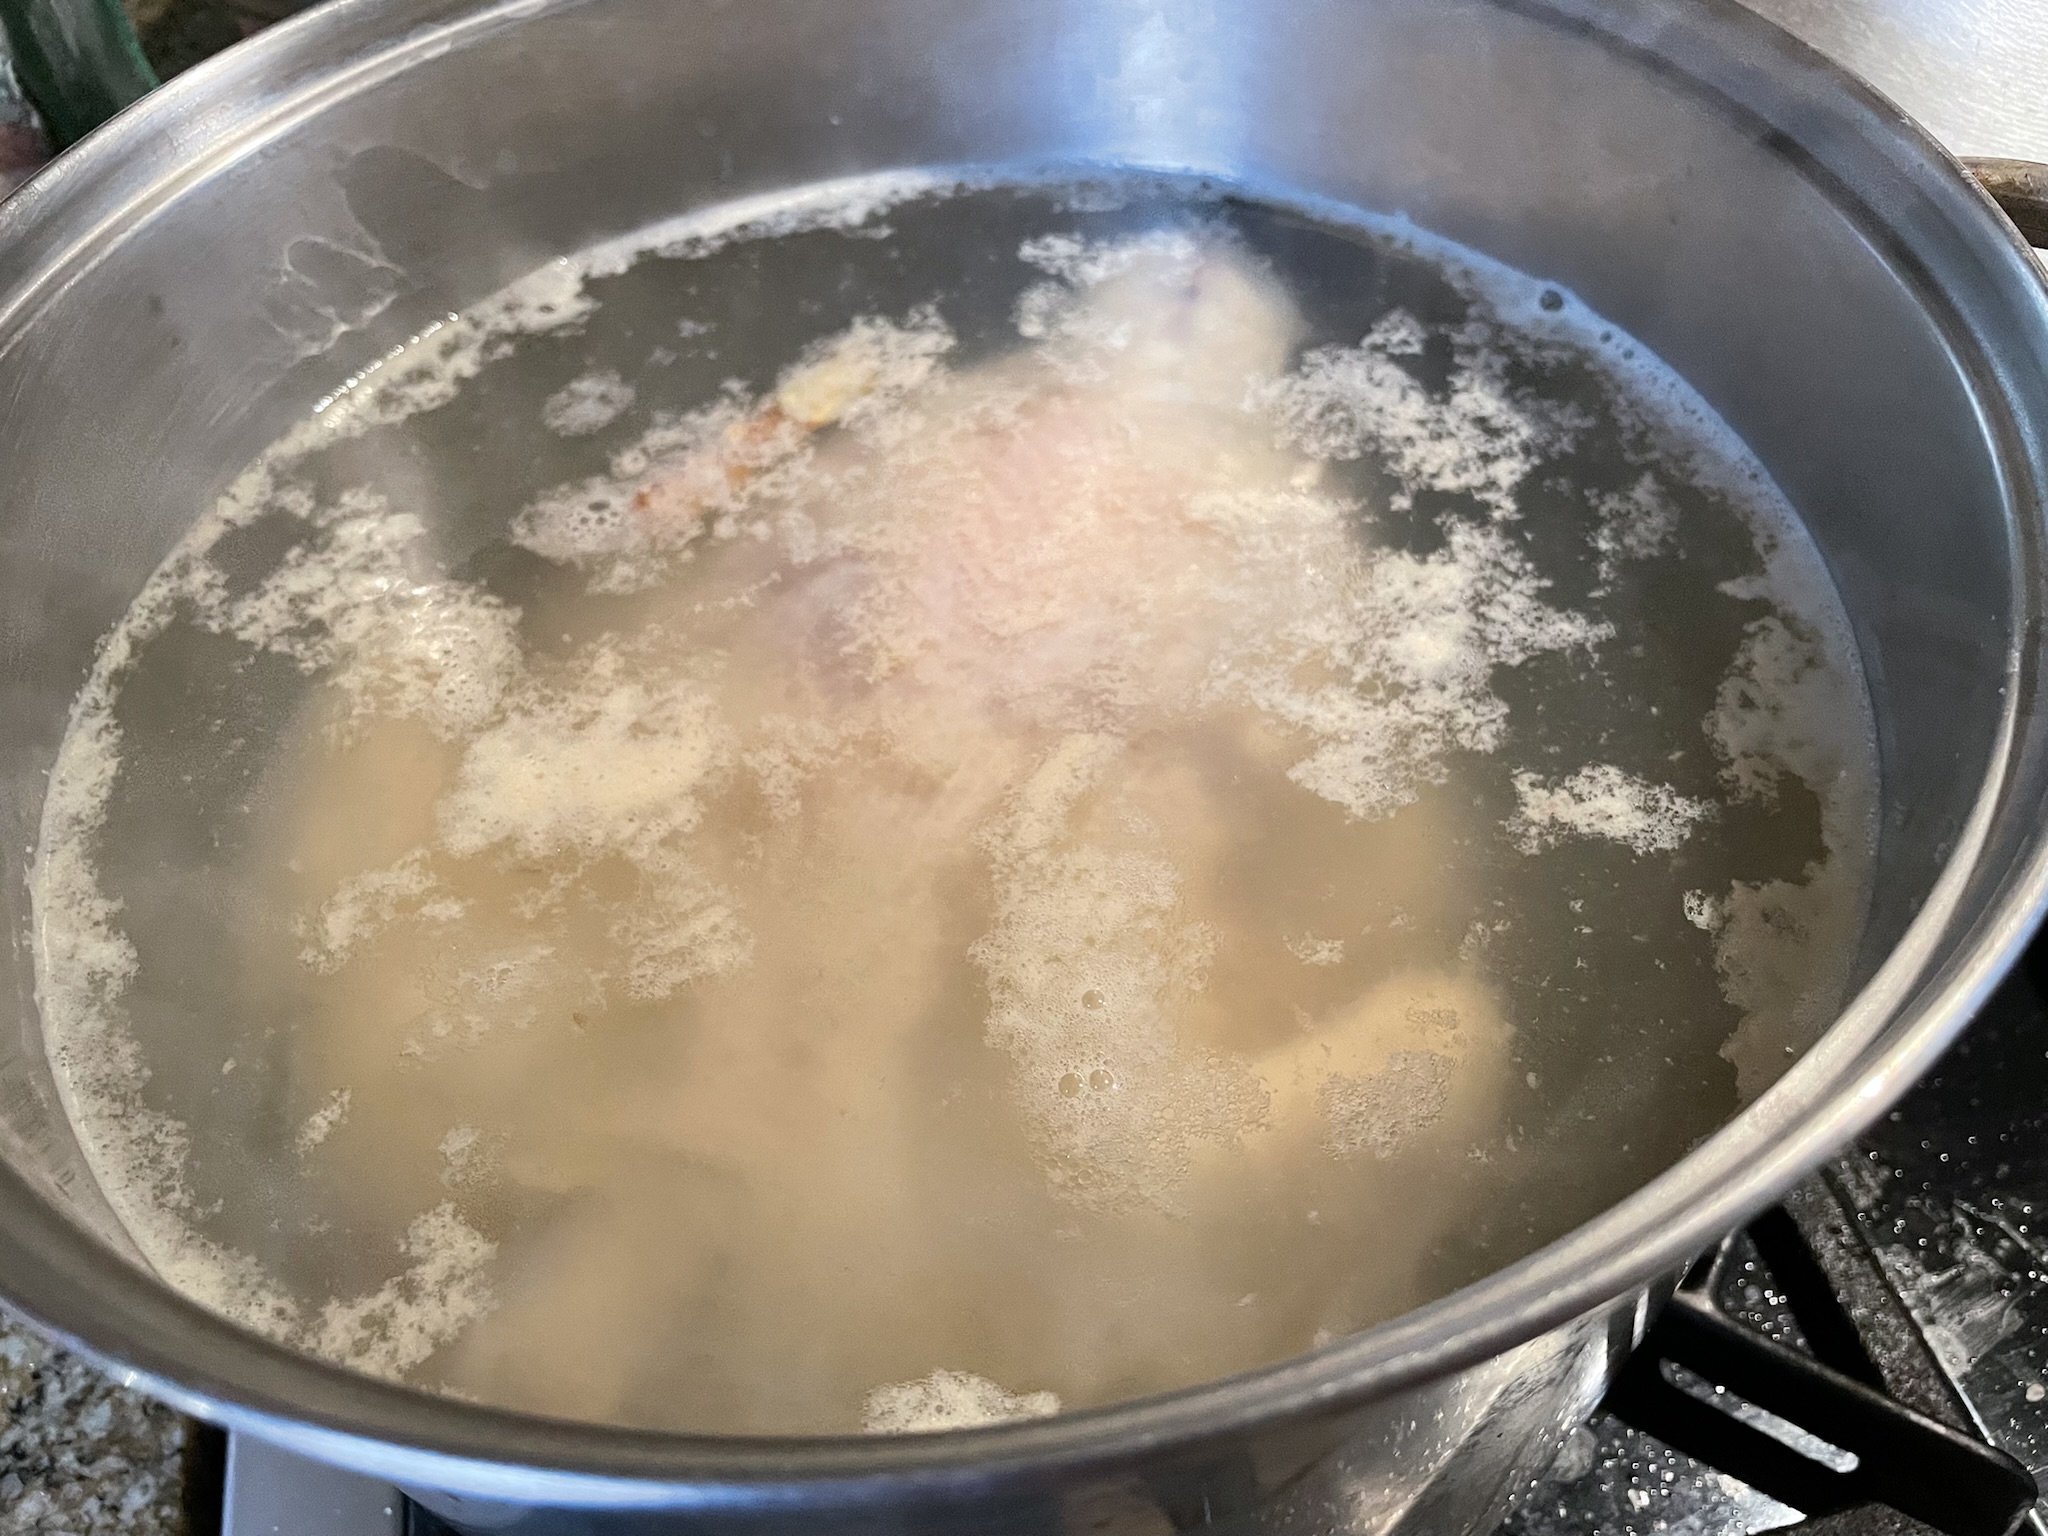 Simmer chicken for 20 minutes